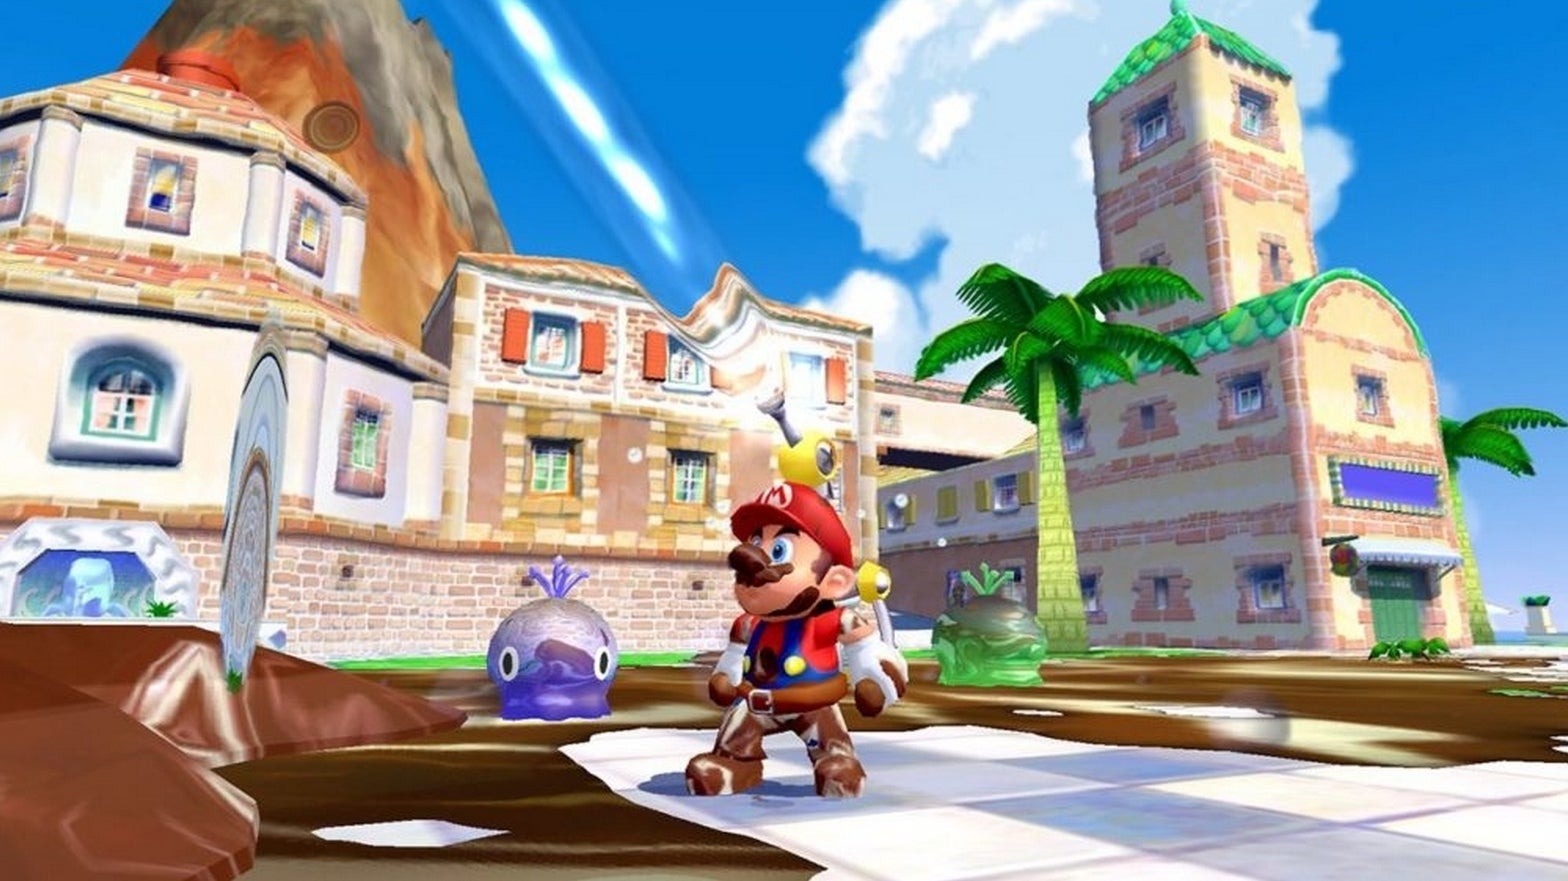 Image for Playing Super Mario Sunshine reminds me of a recent tragedy in my country